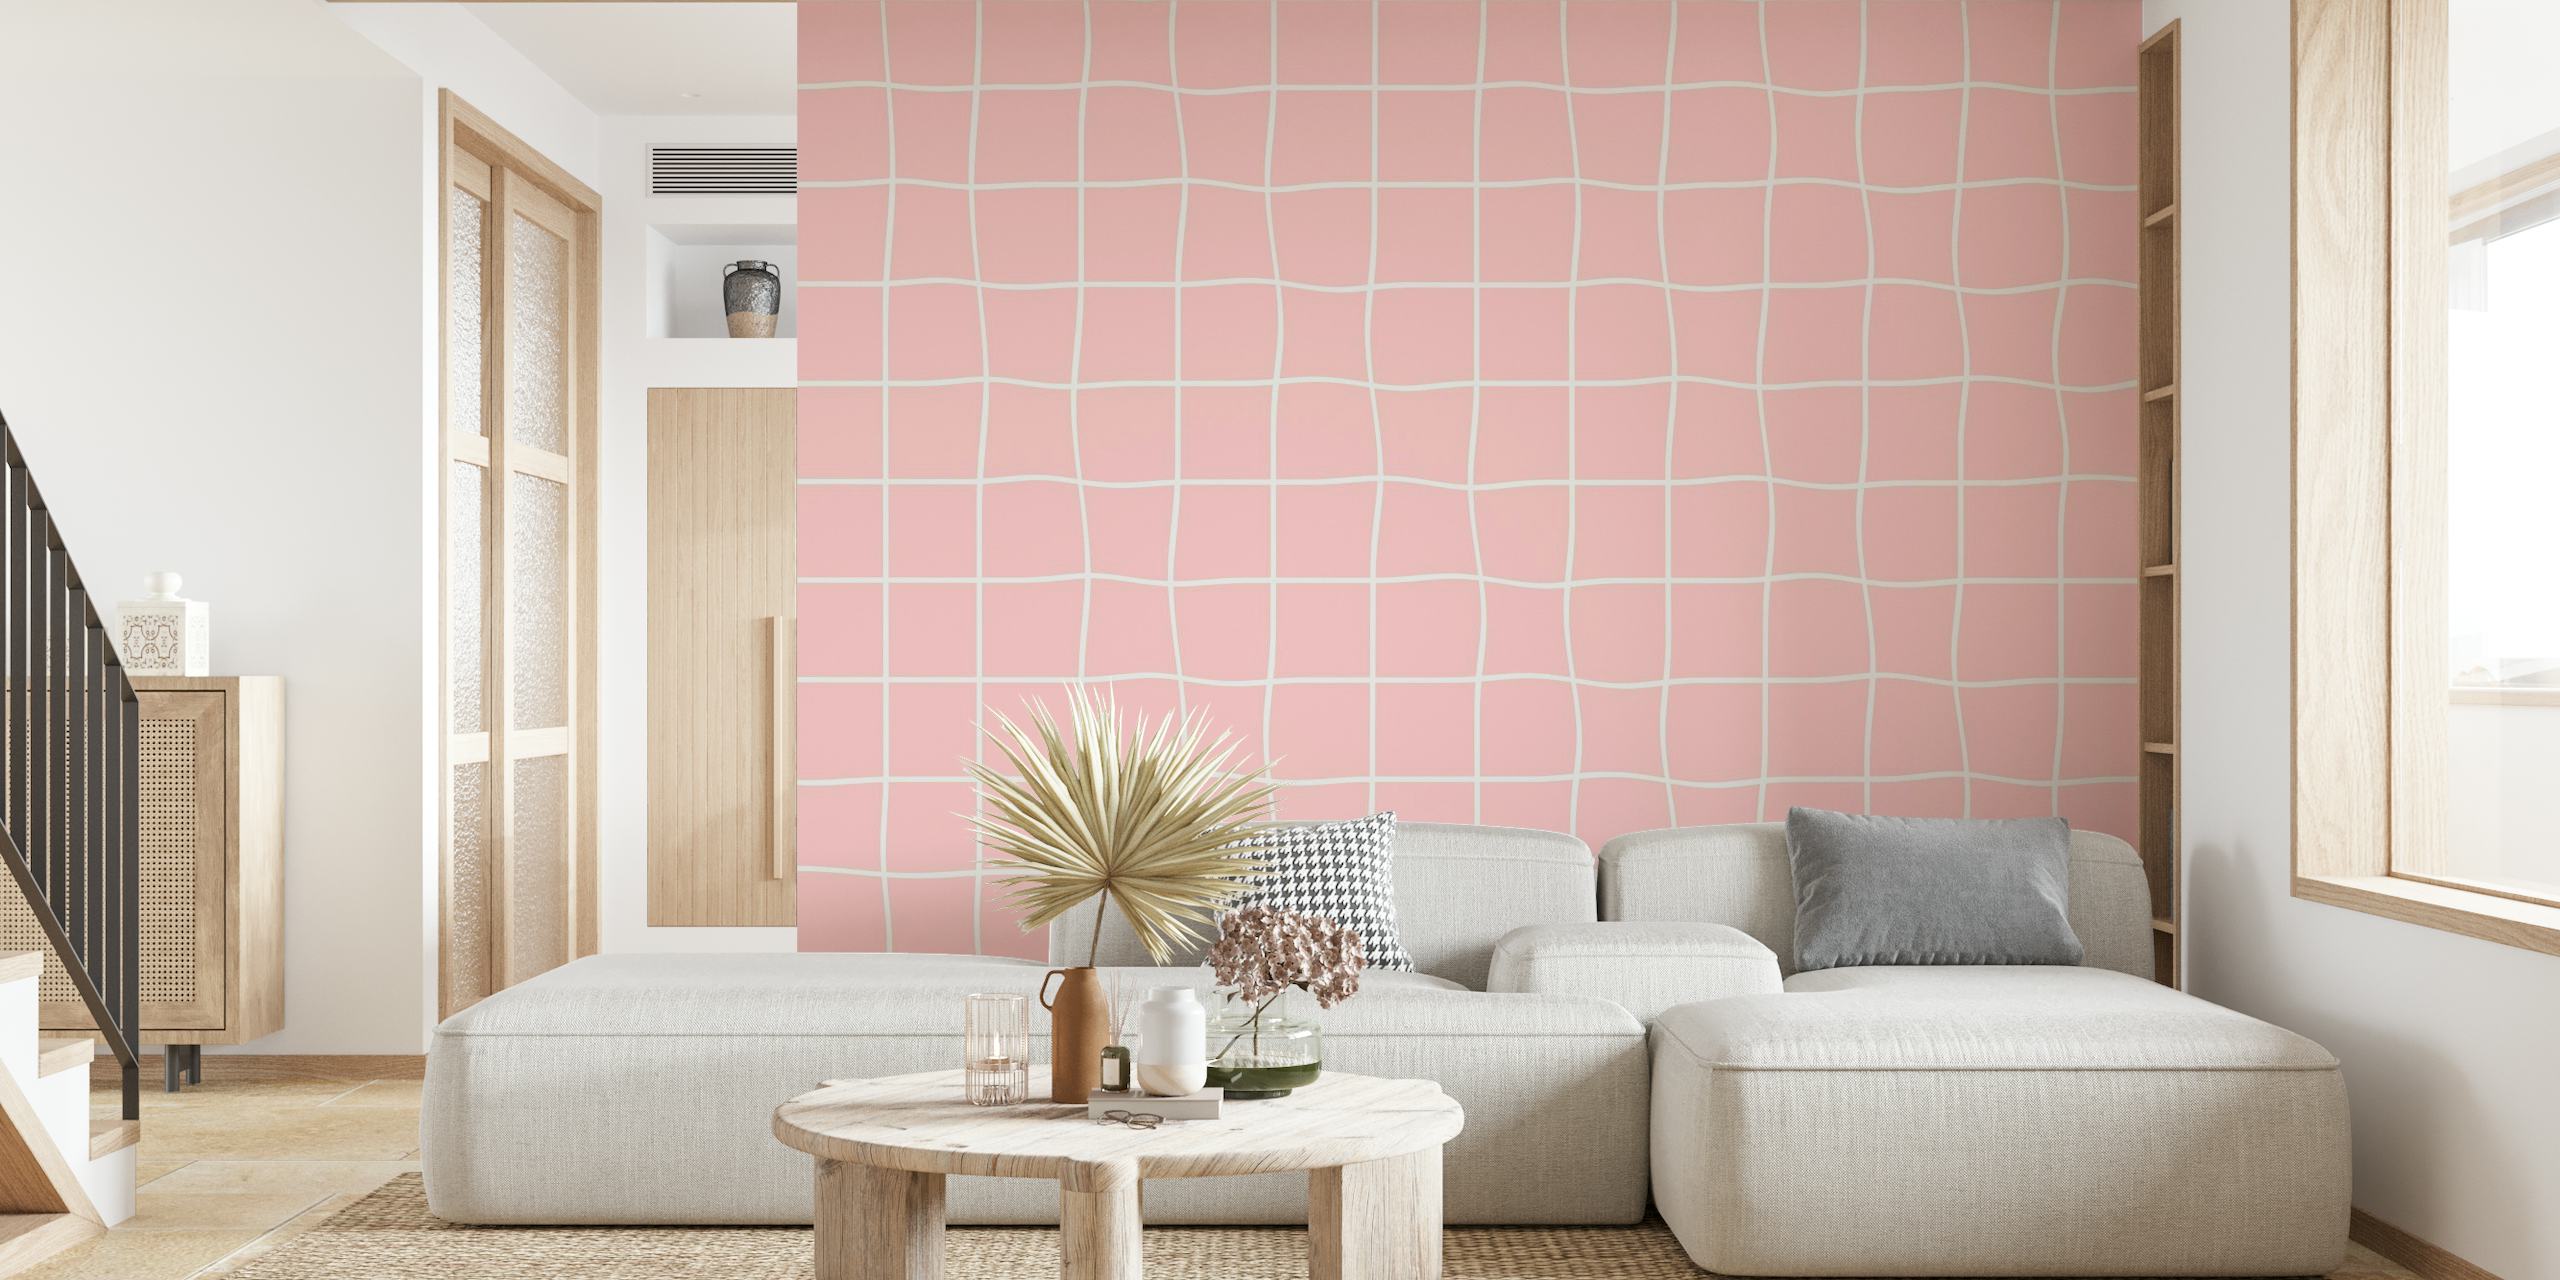 Pink wall mural with minimal white grid pattern for interior decor